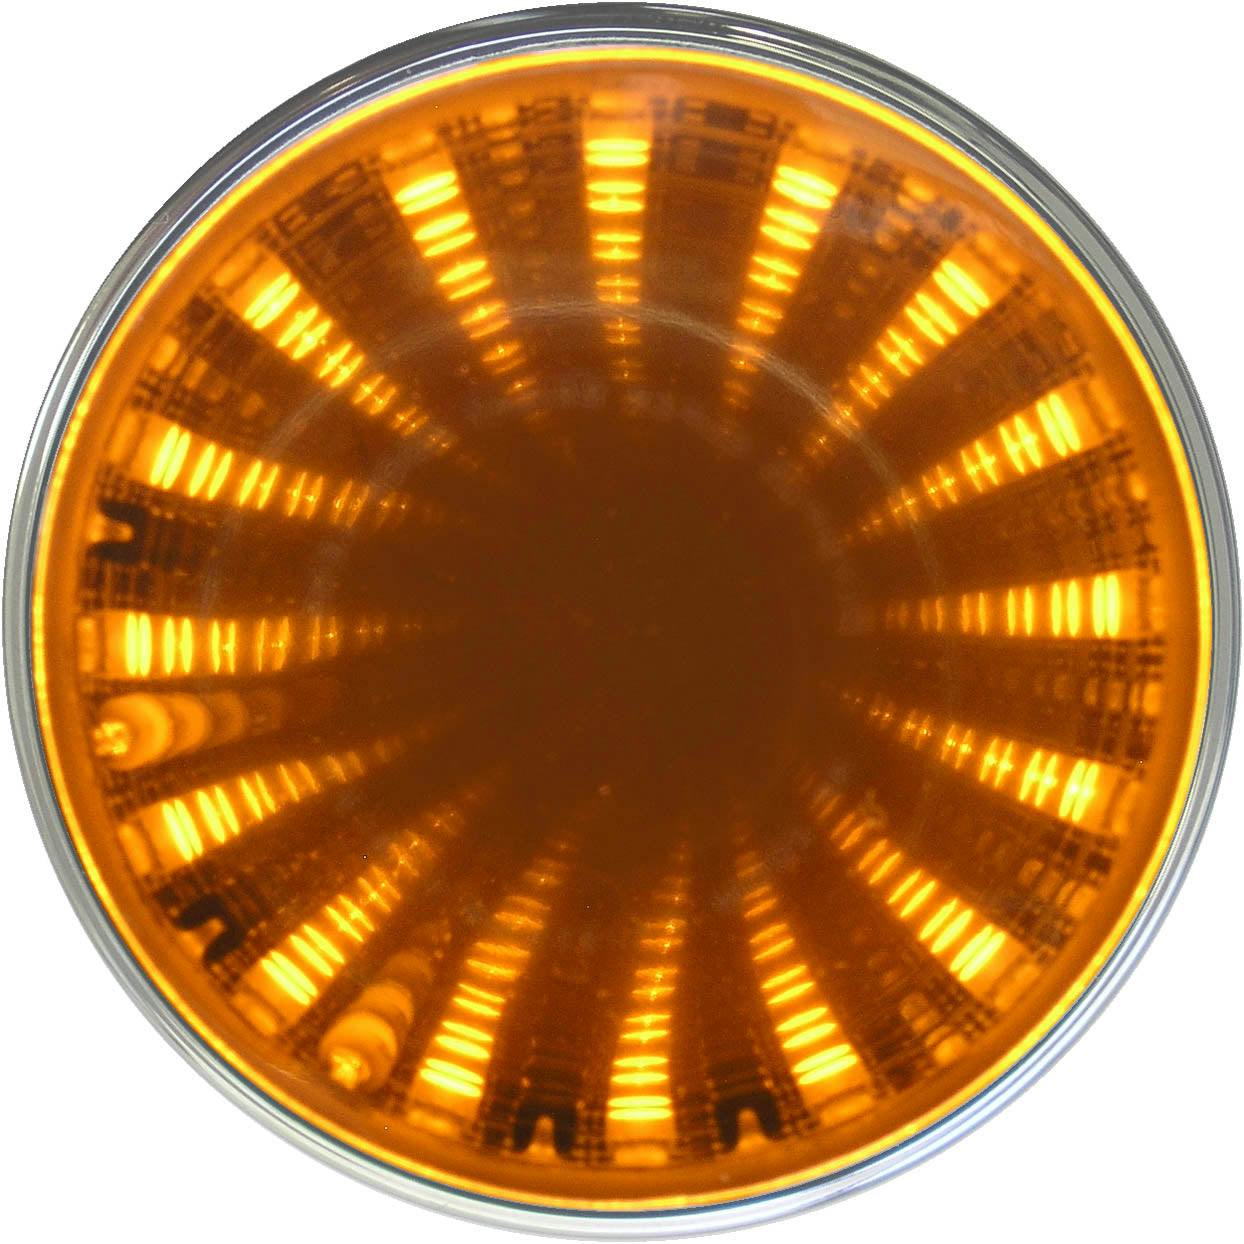 LED Auxiliary Tunnel Light, Round, 2", amber, bulk pack (Pack of 50)